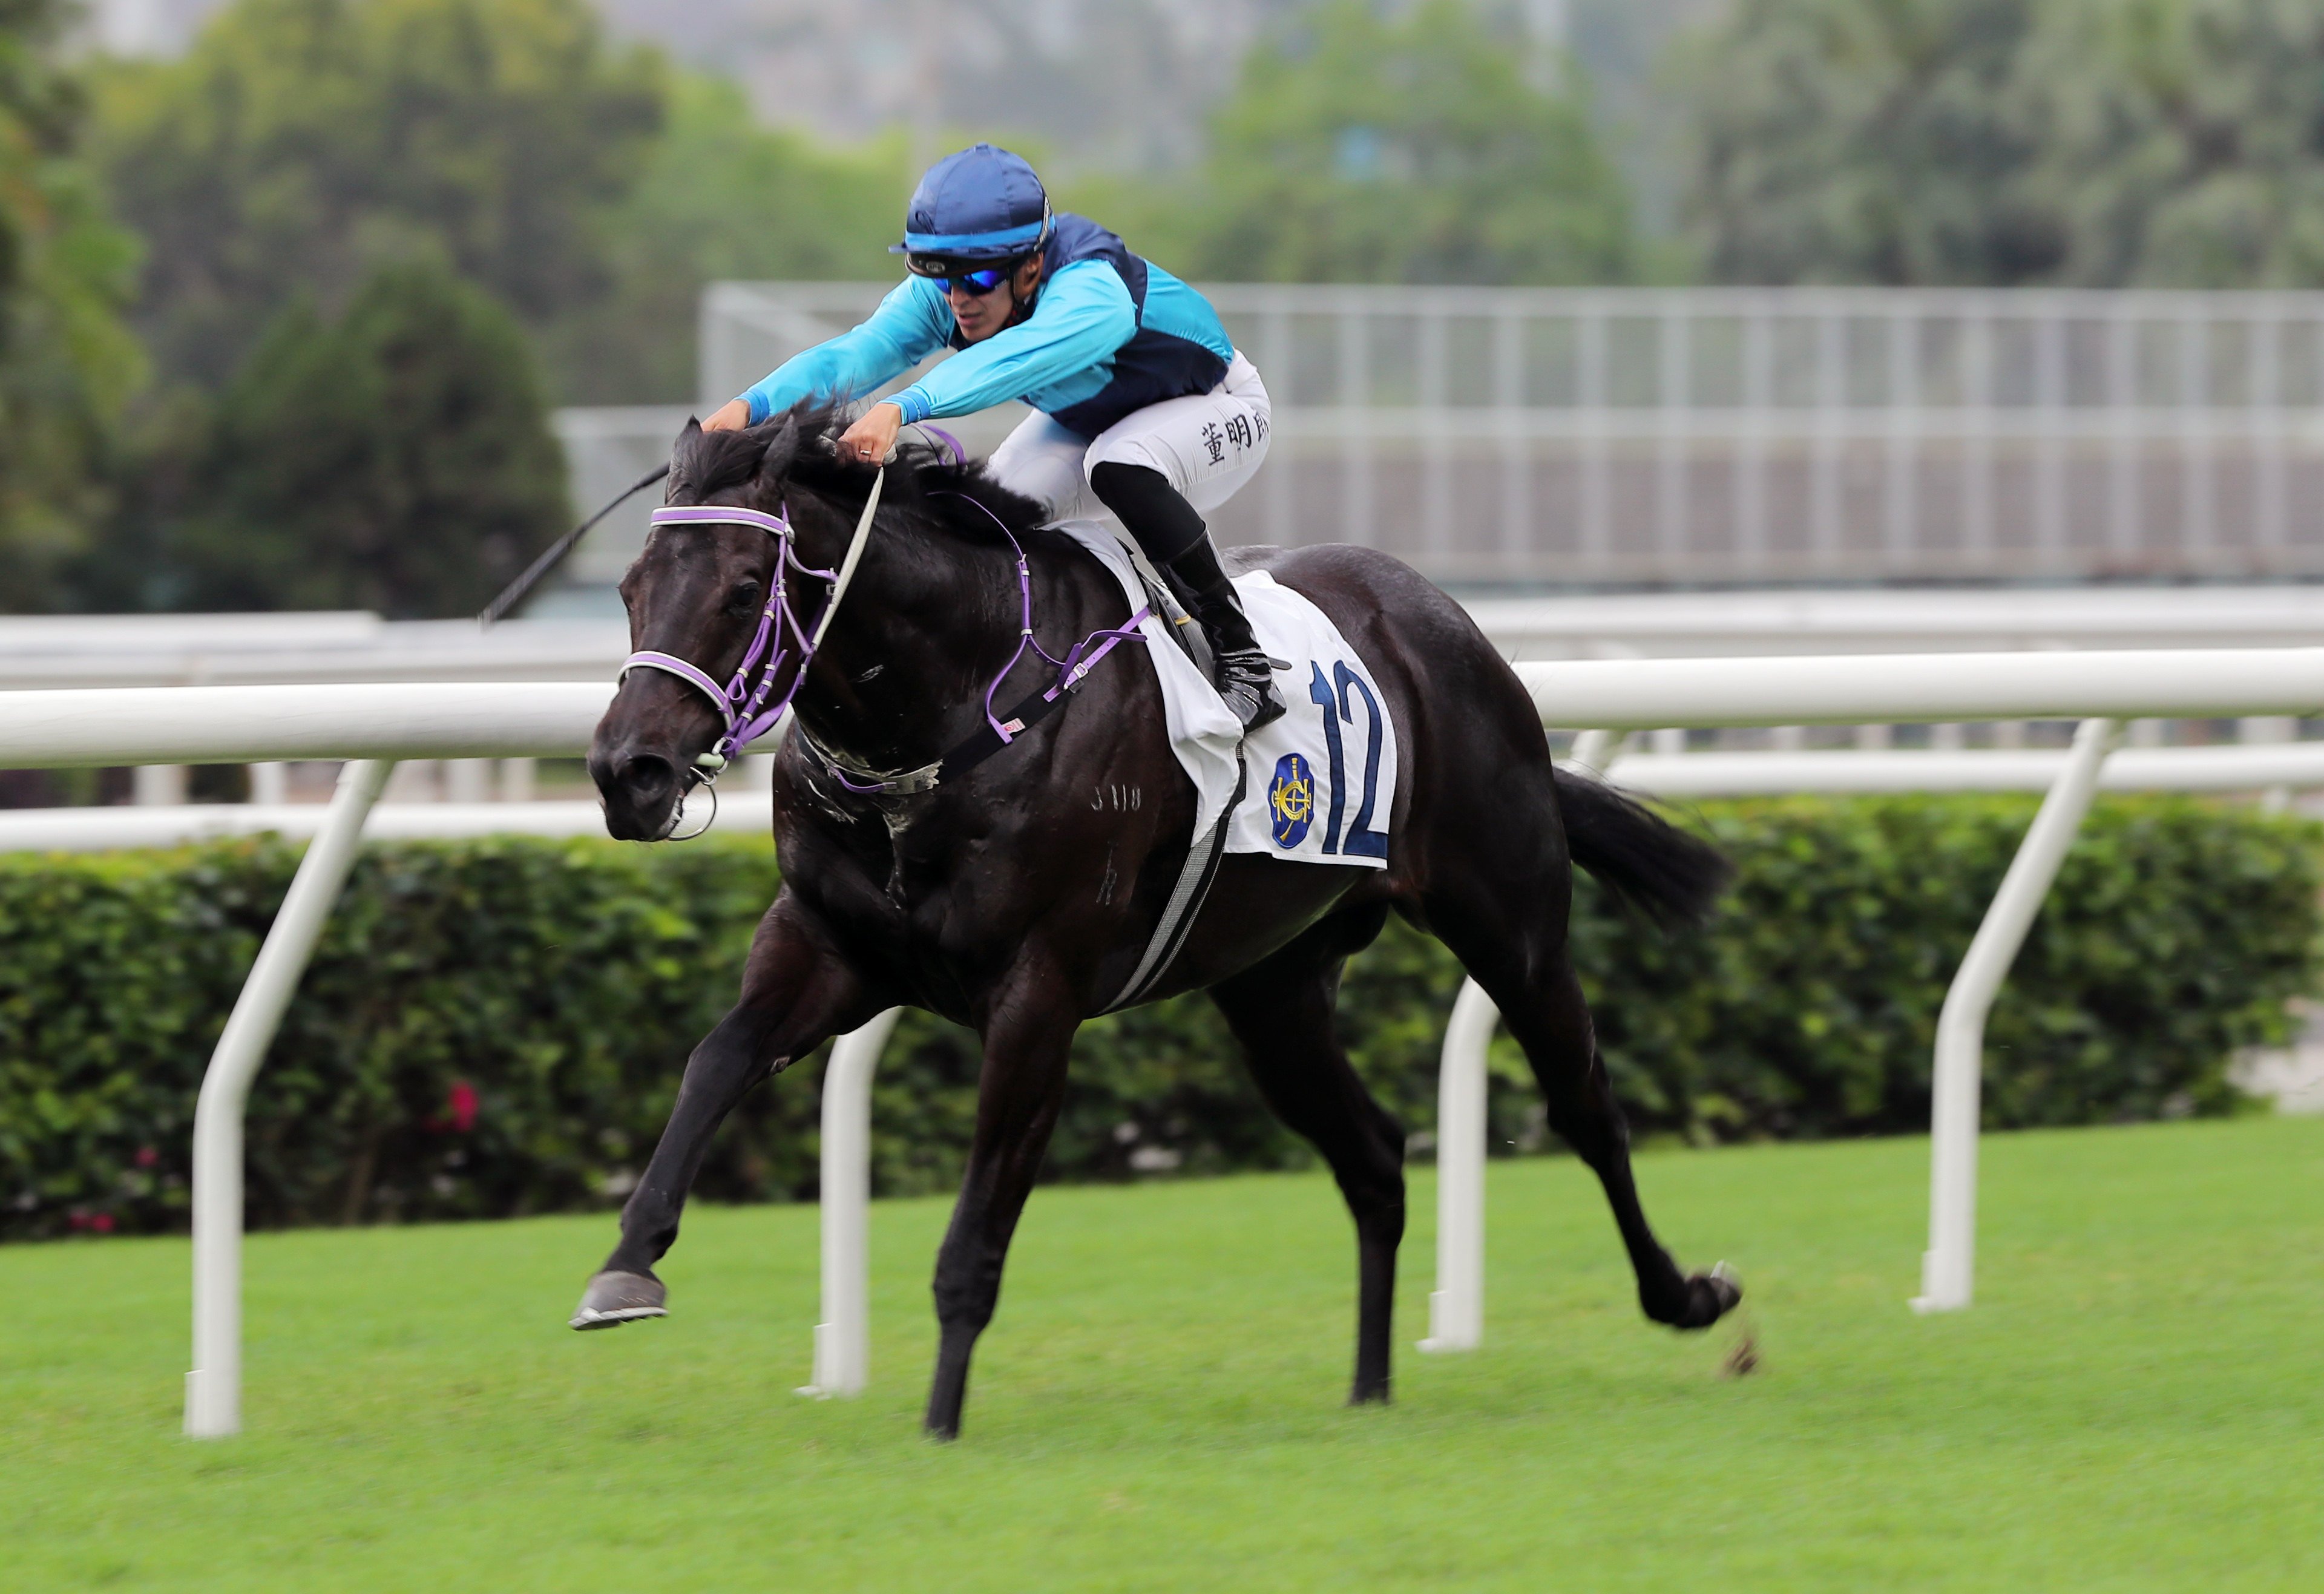 Sunny Da Best leads all the way to win impressively for Keagan de Melo. Photos: Kenneth Chan